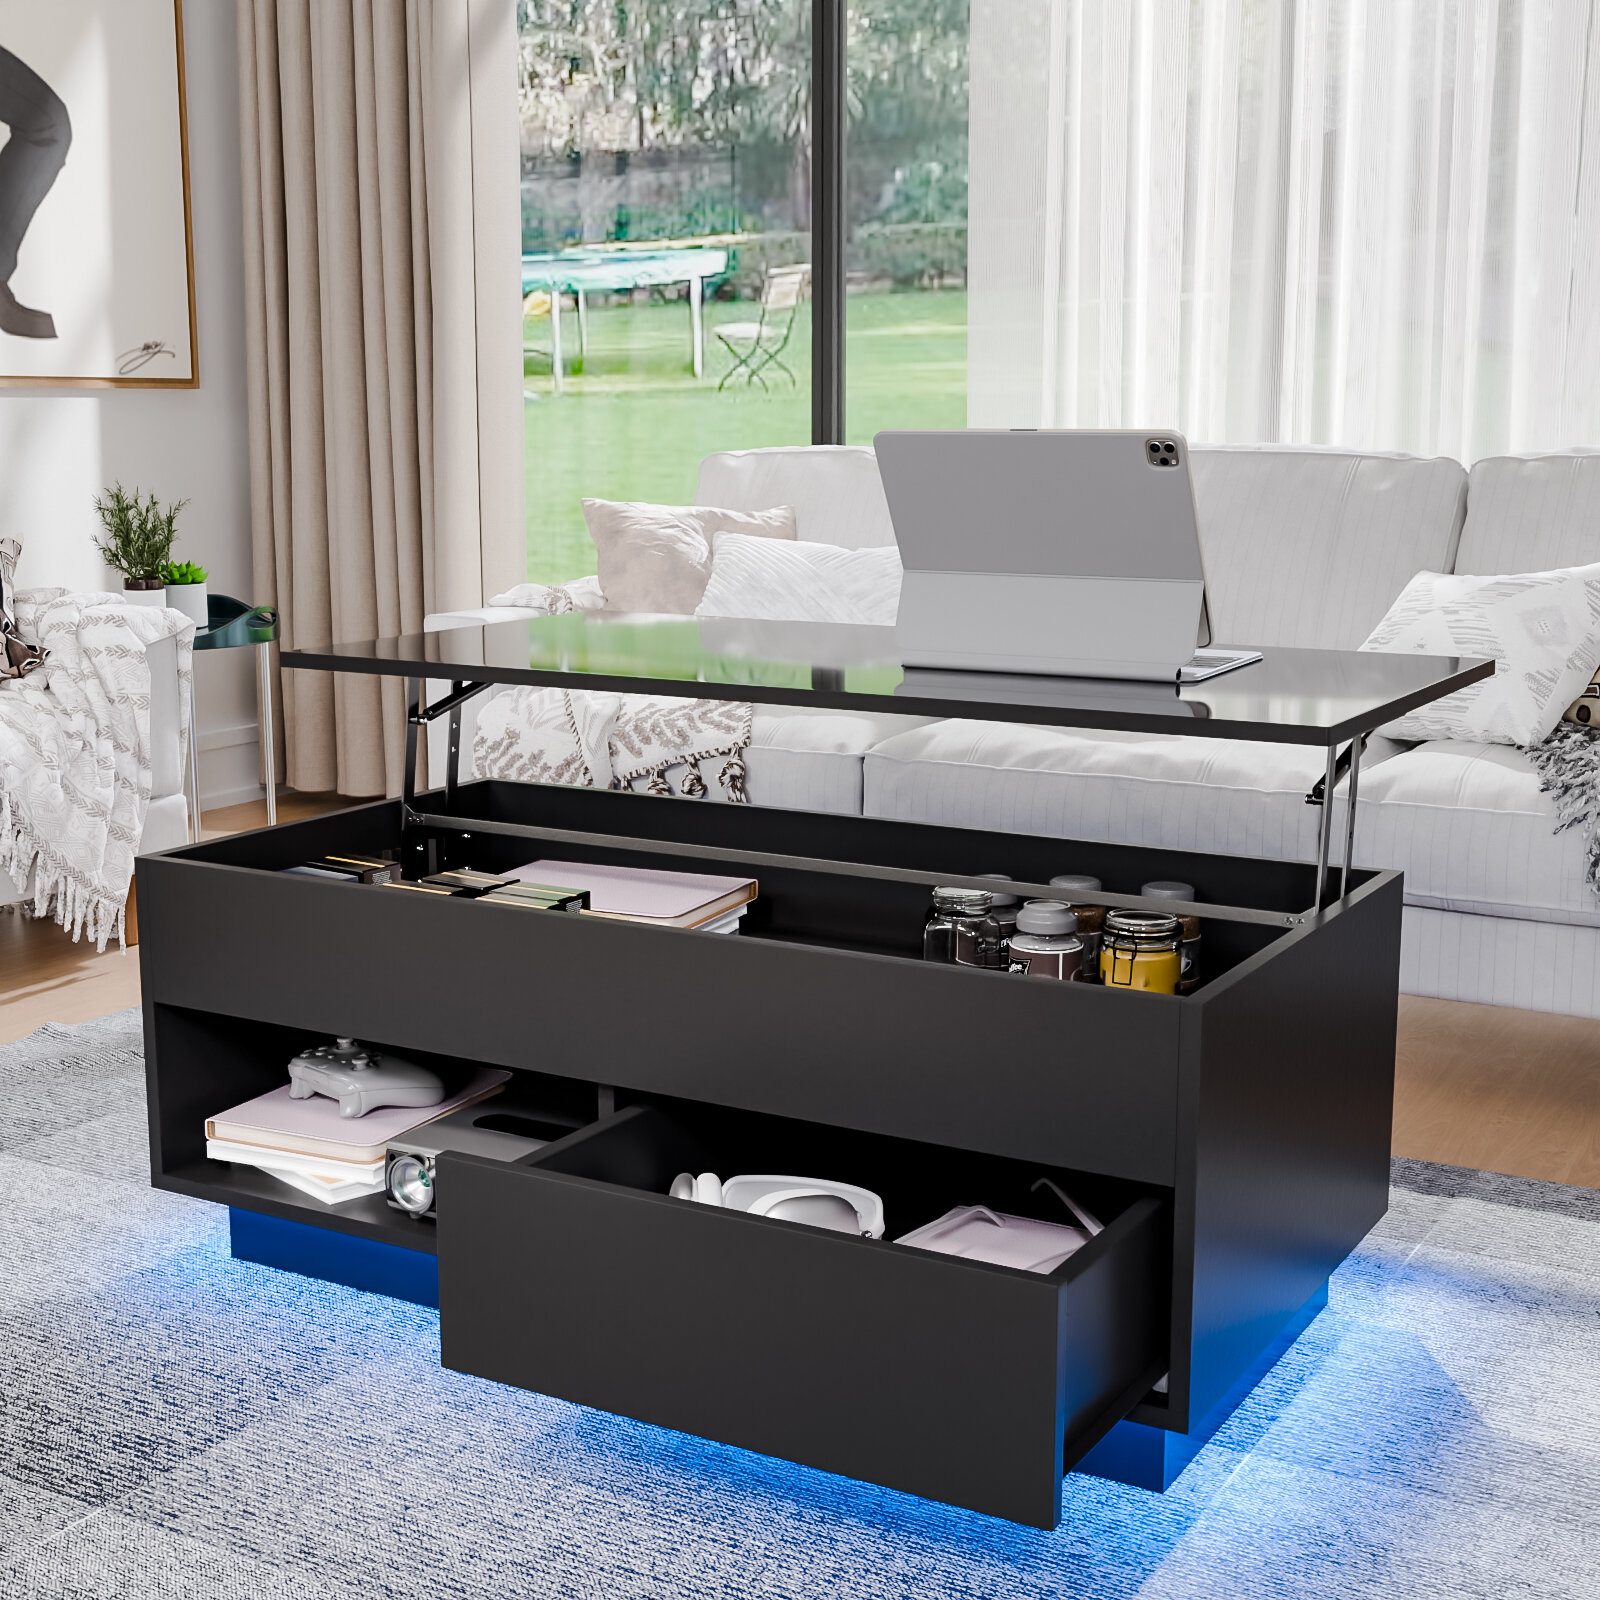 

LED Lift Coffee Table The Ultimate Modern Furniture with Height Adjustment and Color Light / Sleek Design for Home Decor